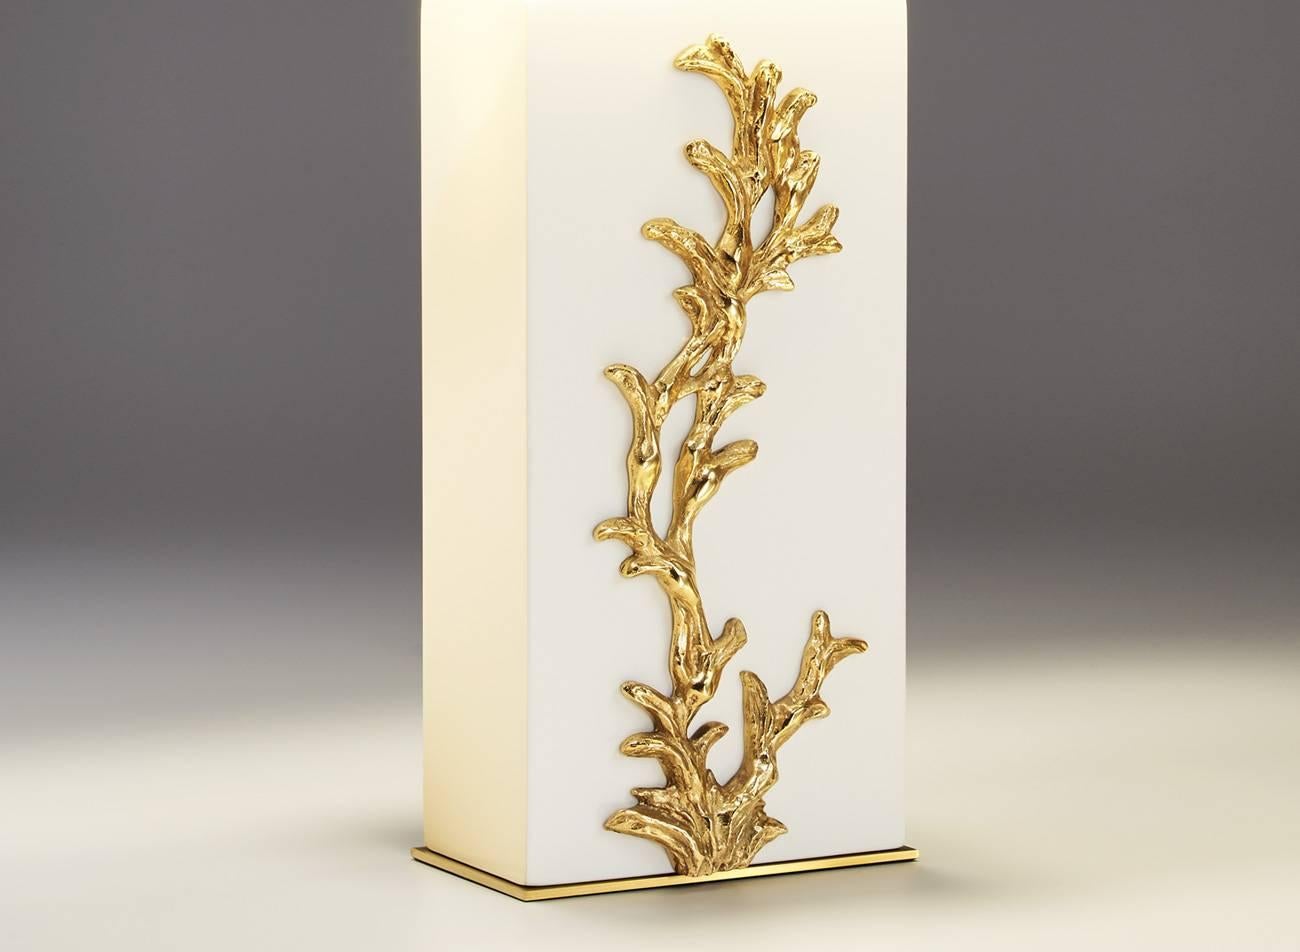 Table lamp Algues by Chrystiane Charles, made of brass with brass shade, signed, made in France.